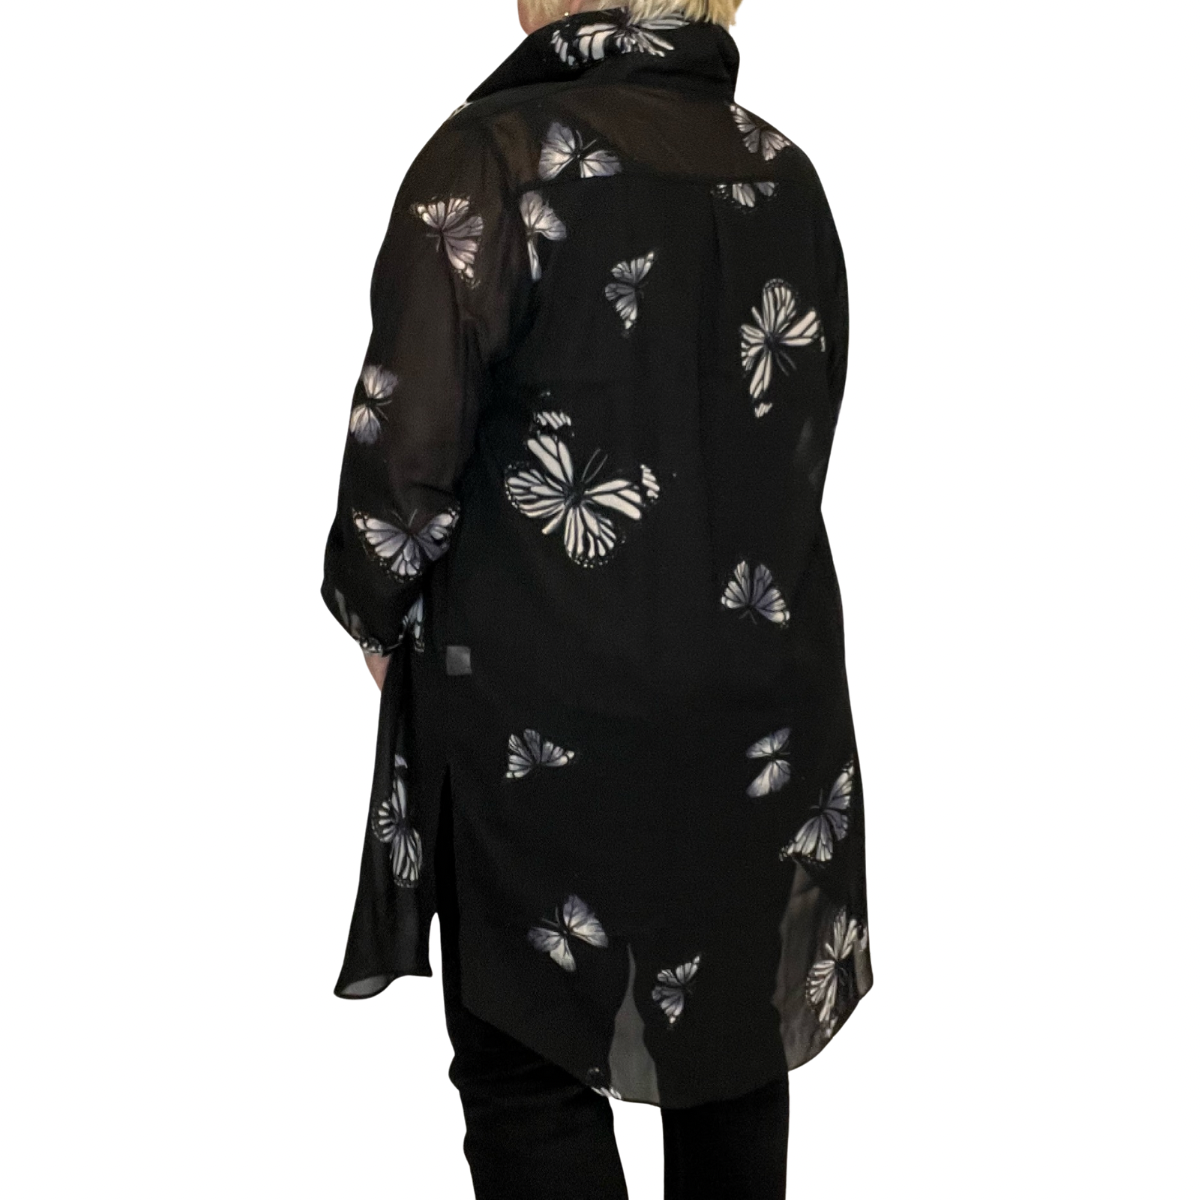 ROCKTHOSECURVES LONG LENGTH CHIFFON BLOUSE / SHIRT WITH BUTTERFLY PRINT